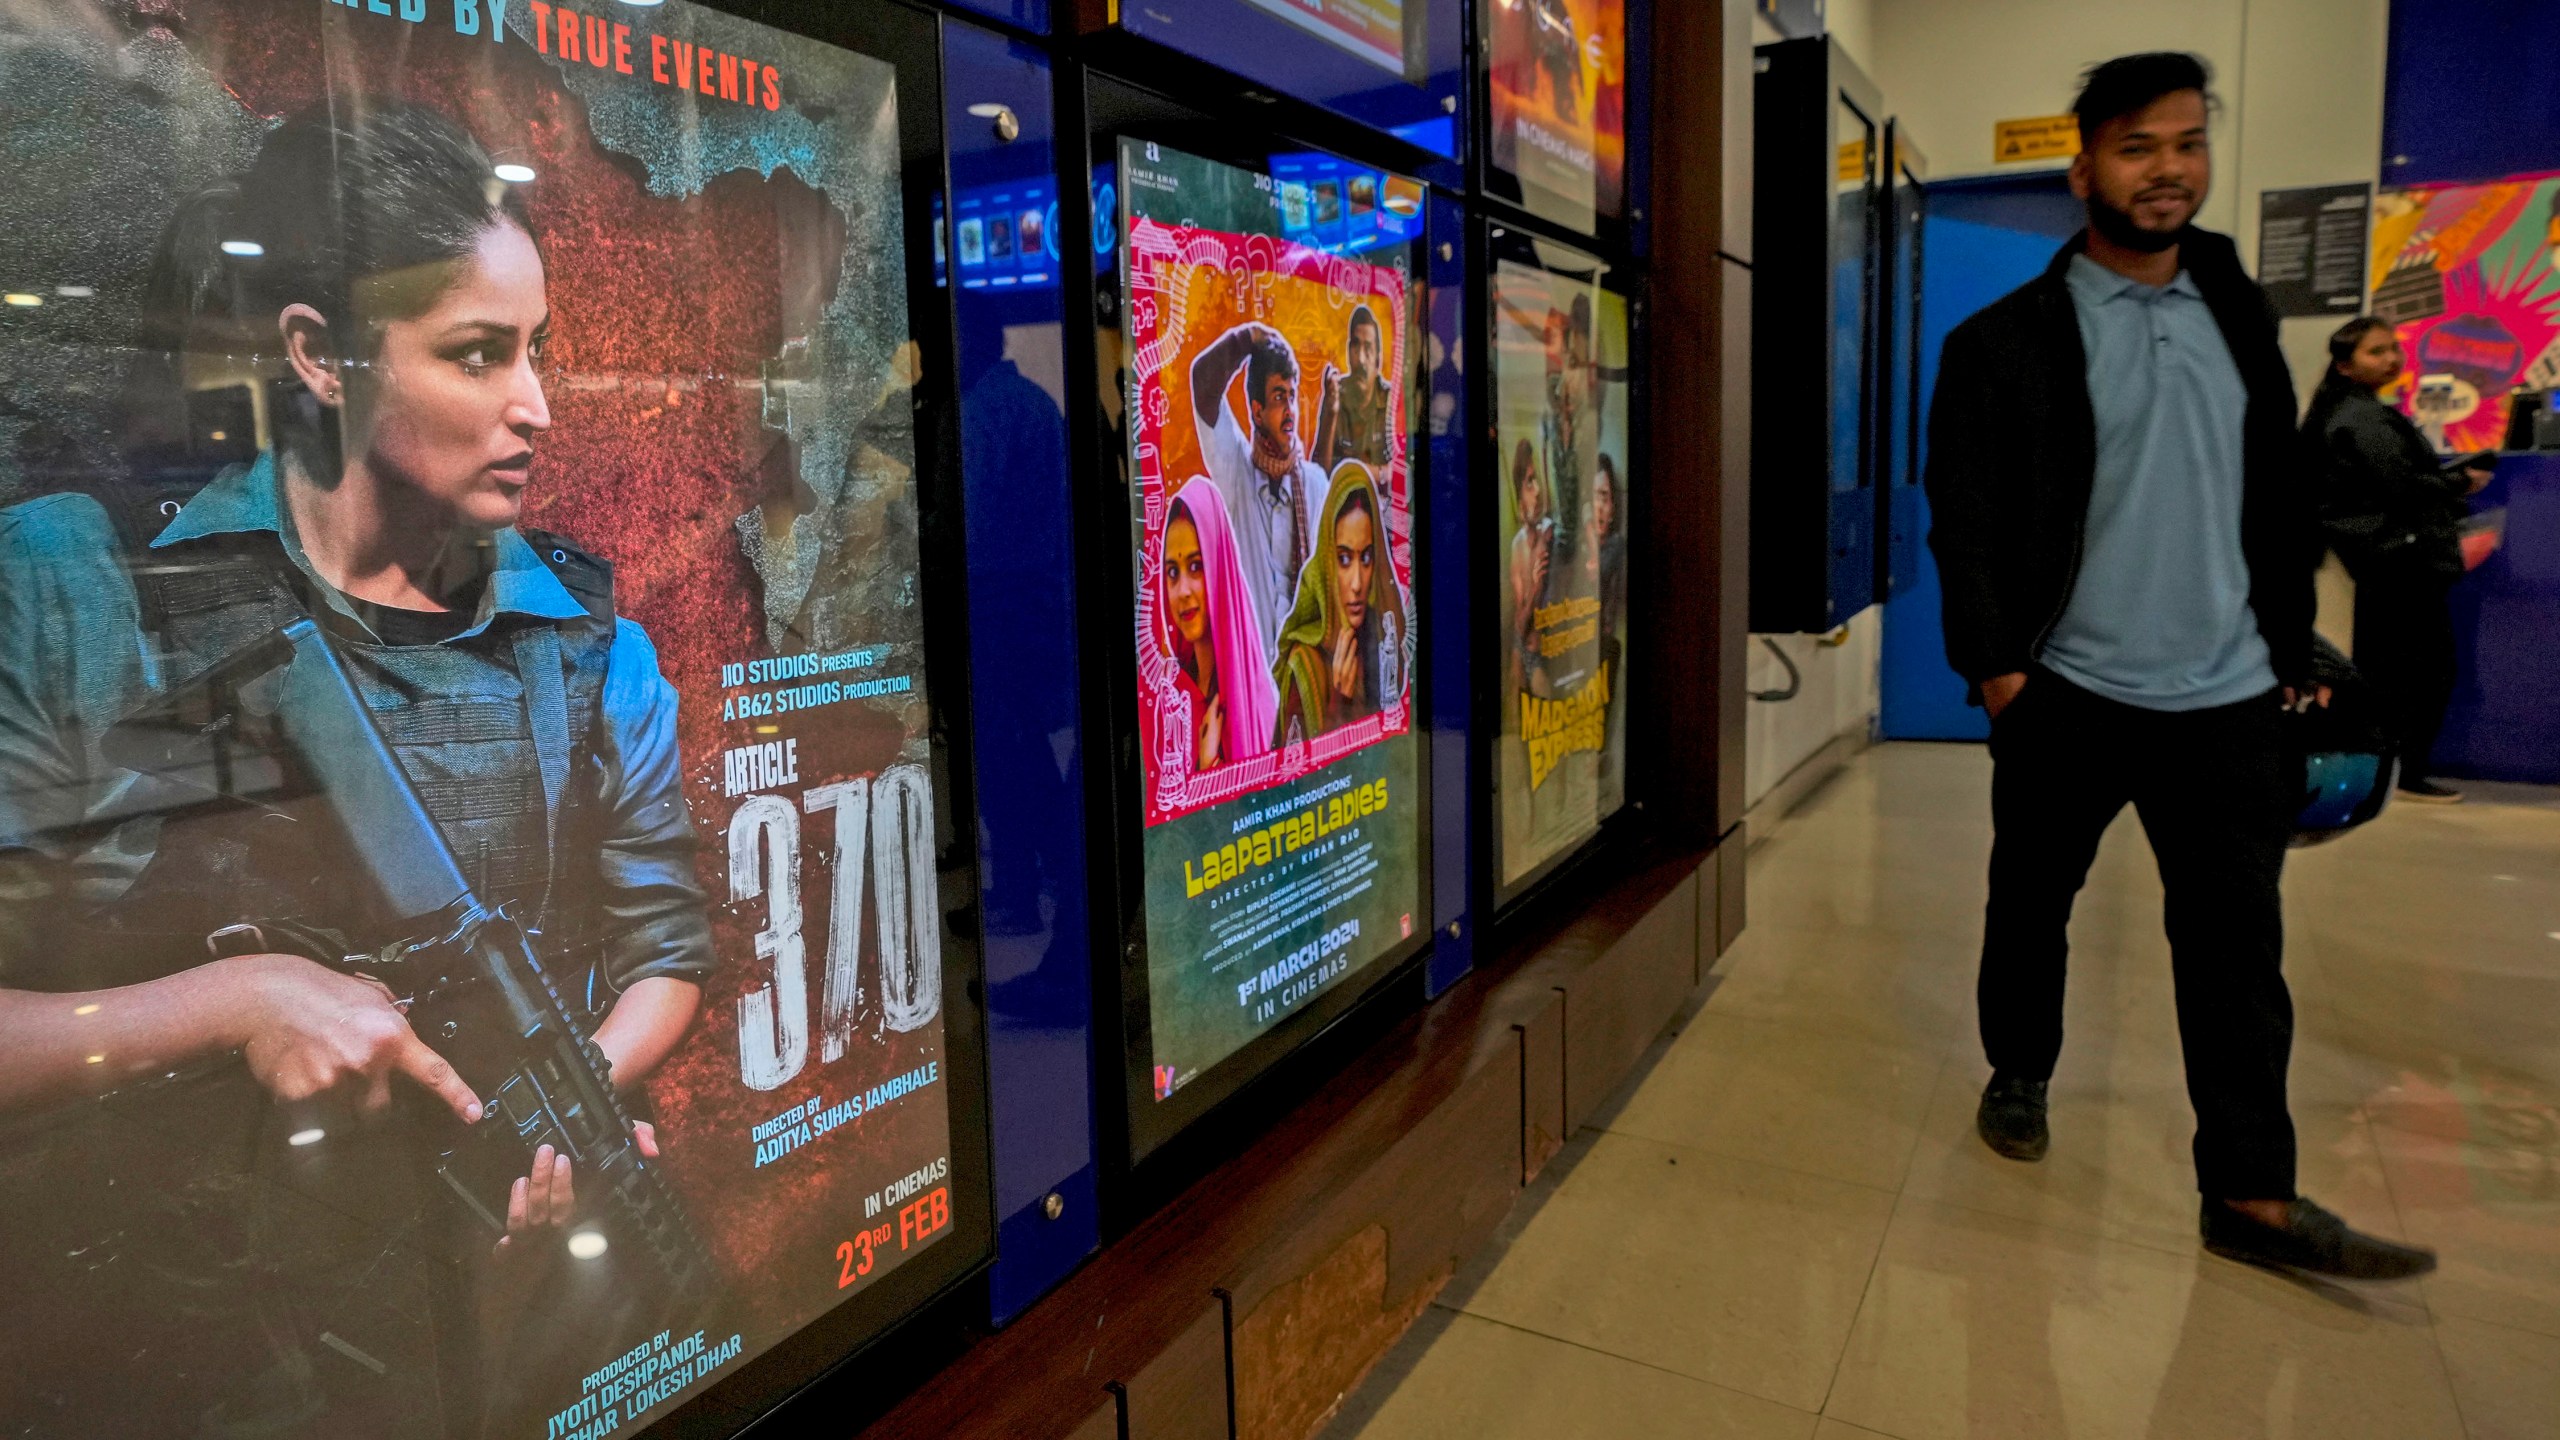 A man stands next to a poster of the movie Article 370 displayed at a cinema hall in Guwahati, India, Thursday, March 21, 2024. The movie is one of several upcoming Bollywood releases based on polarizing issues, which either promote Indian Prime Minister Narendra Modi and his government’s political agenda, or lambast his critics. (AP Photo/Anupam Nath)